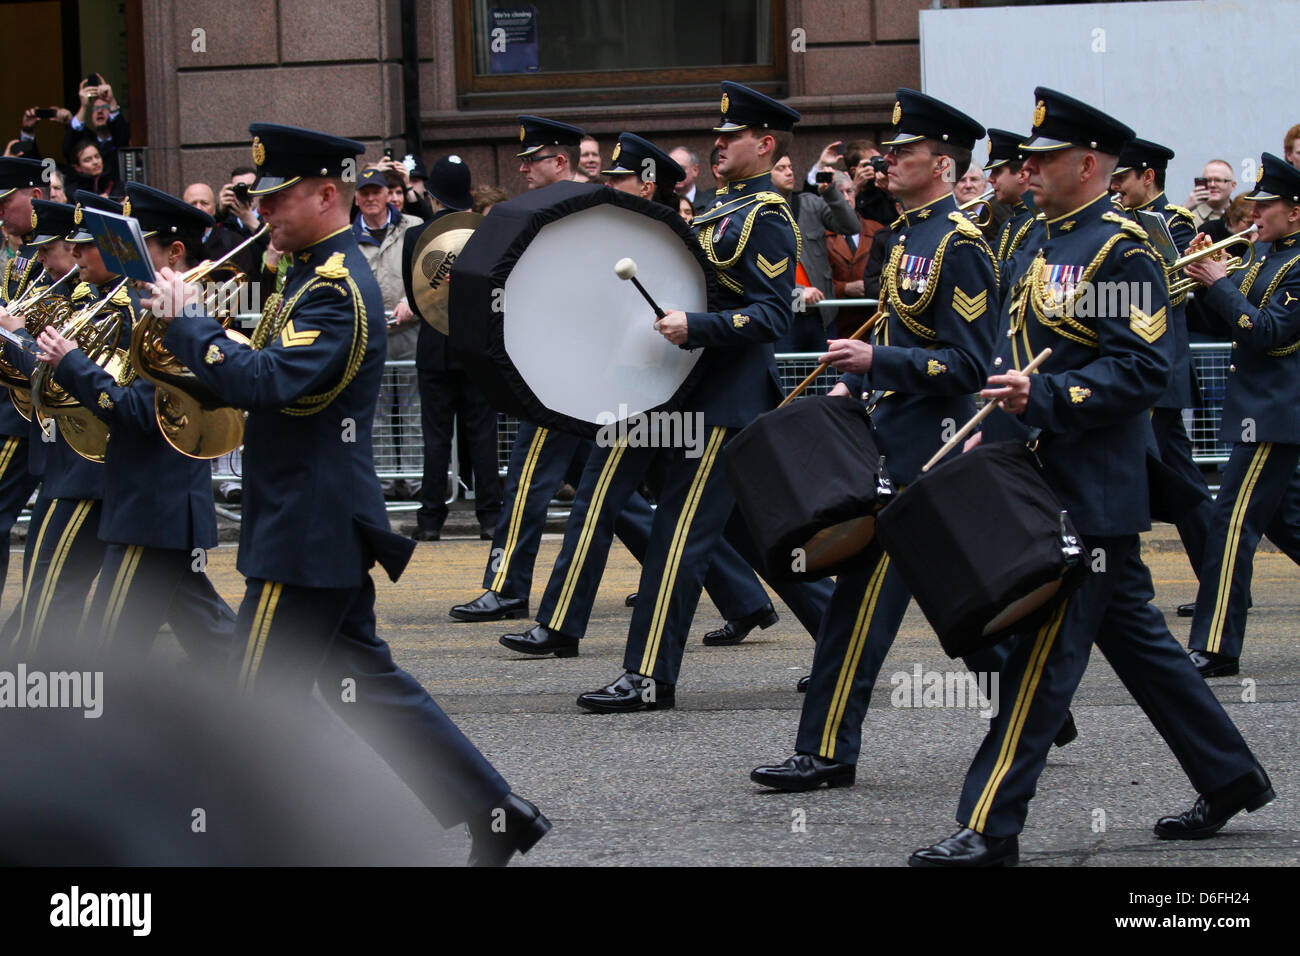 London, UK. 17th April 2013. The Funeral of Baroness Margaret Thatcher. Drums are covered in black cloth for the funeral procession. The Funeral service takes place in St. Paul's Cathedral, London. Pic: Paul Marriott Photography/Alamy Live News Stock Photo